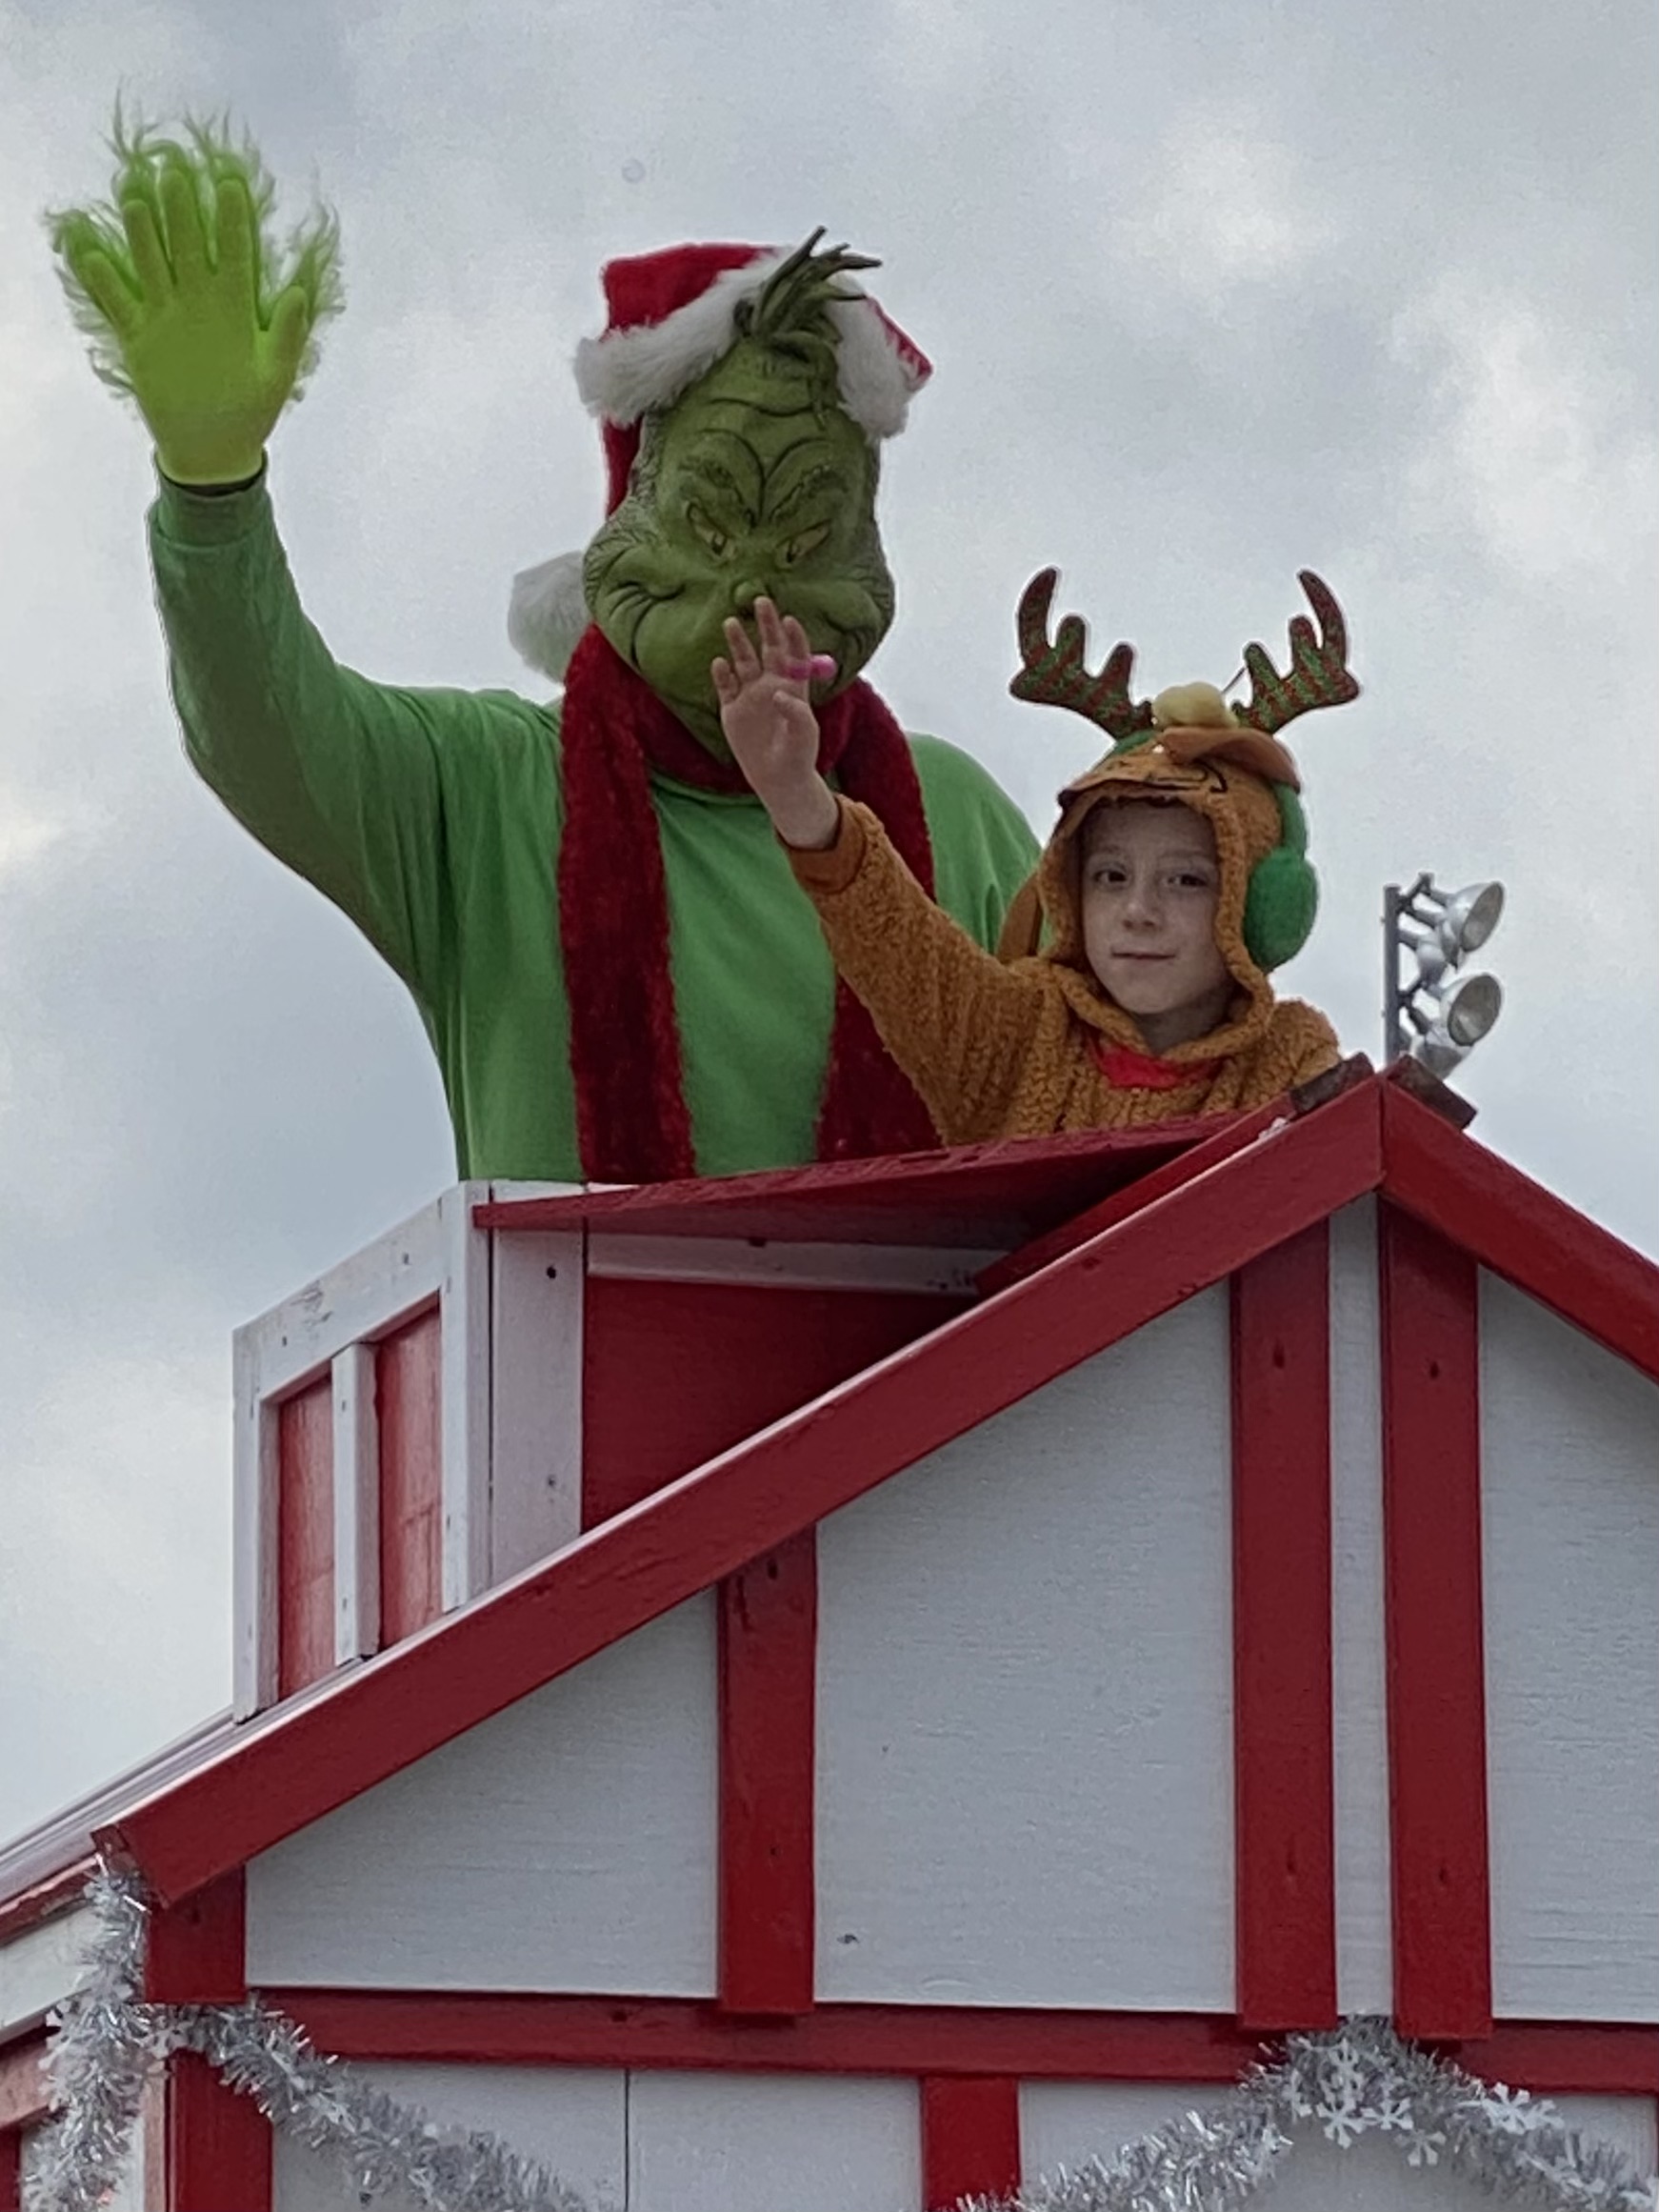 The Grinch Did NOT steal the Christmas Parade in 2021.